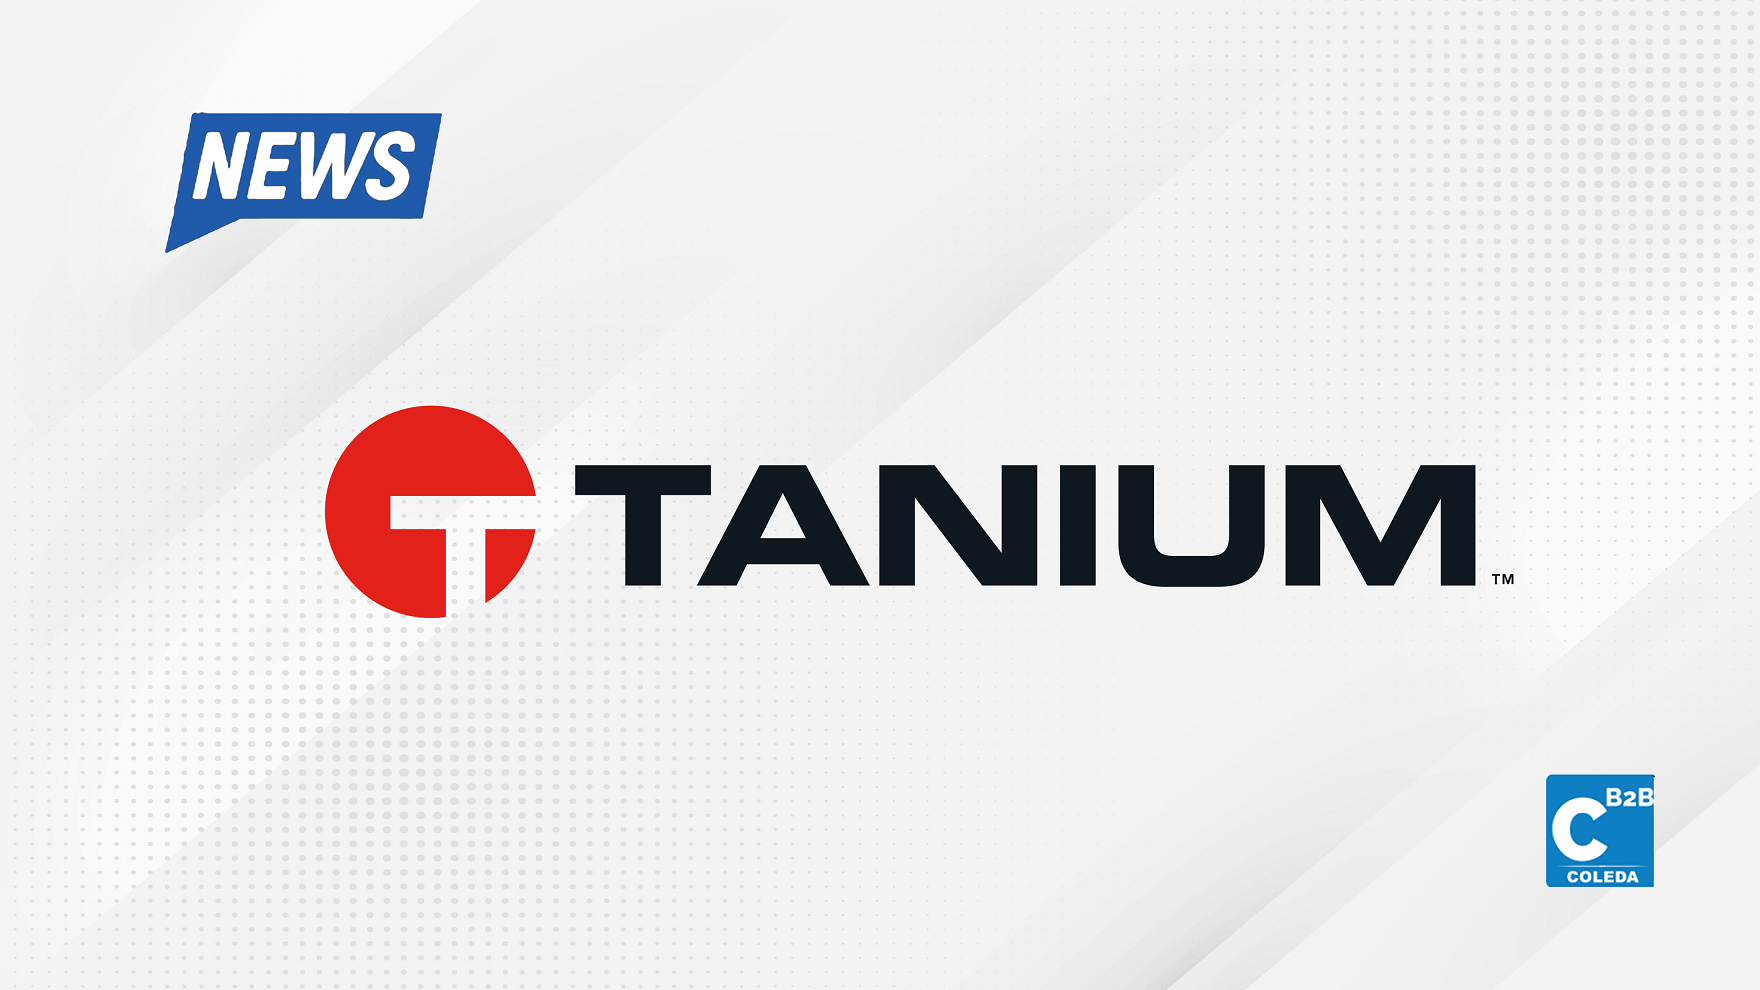 Tanium appoints Dan Streetman as the Chief Executive Officer